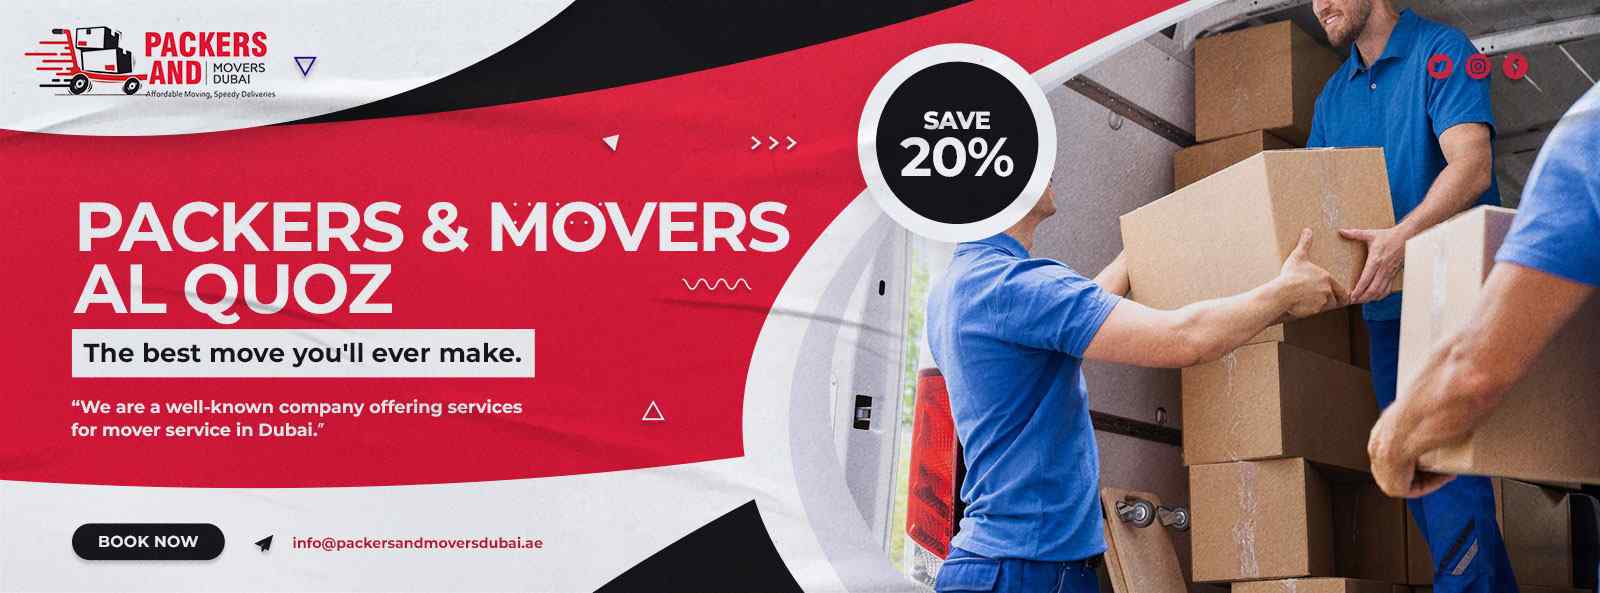 Best-Packers-And-Movers-Al-Qouz